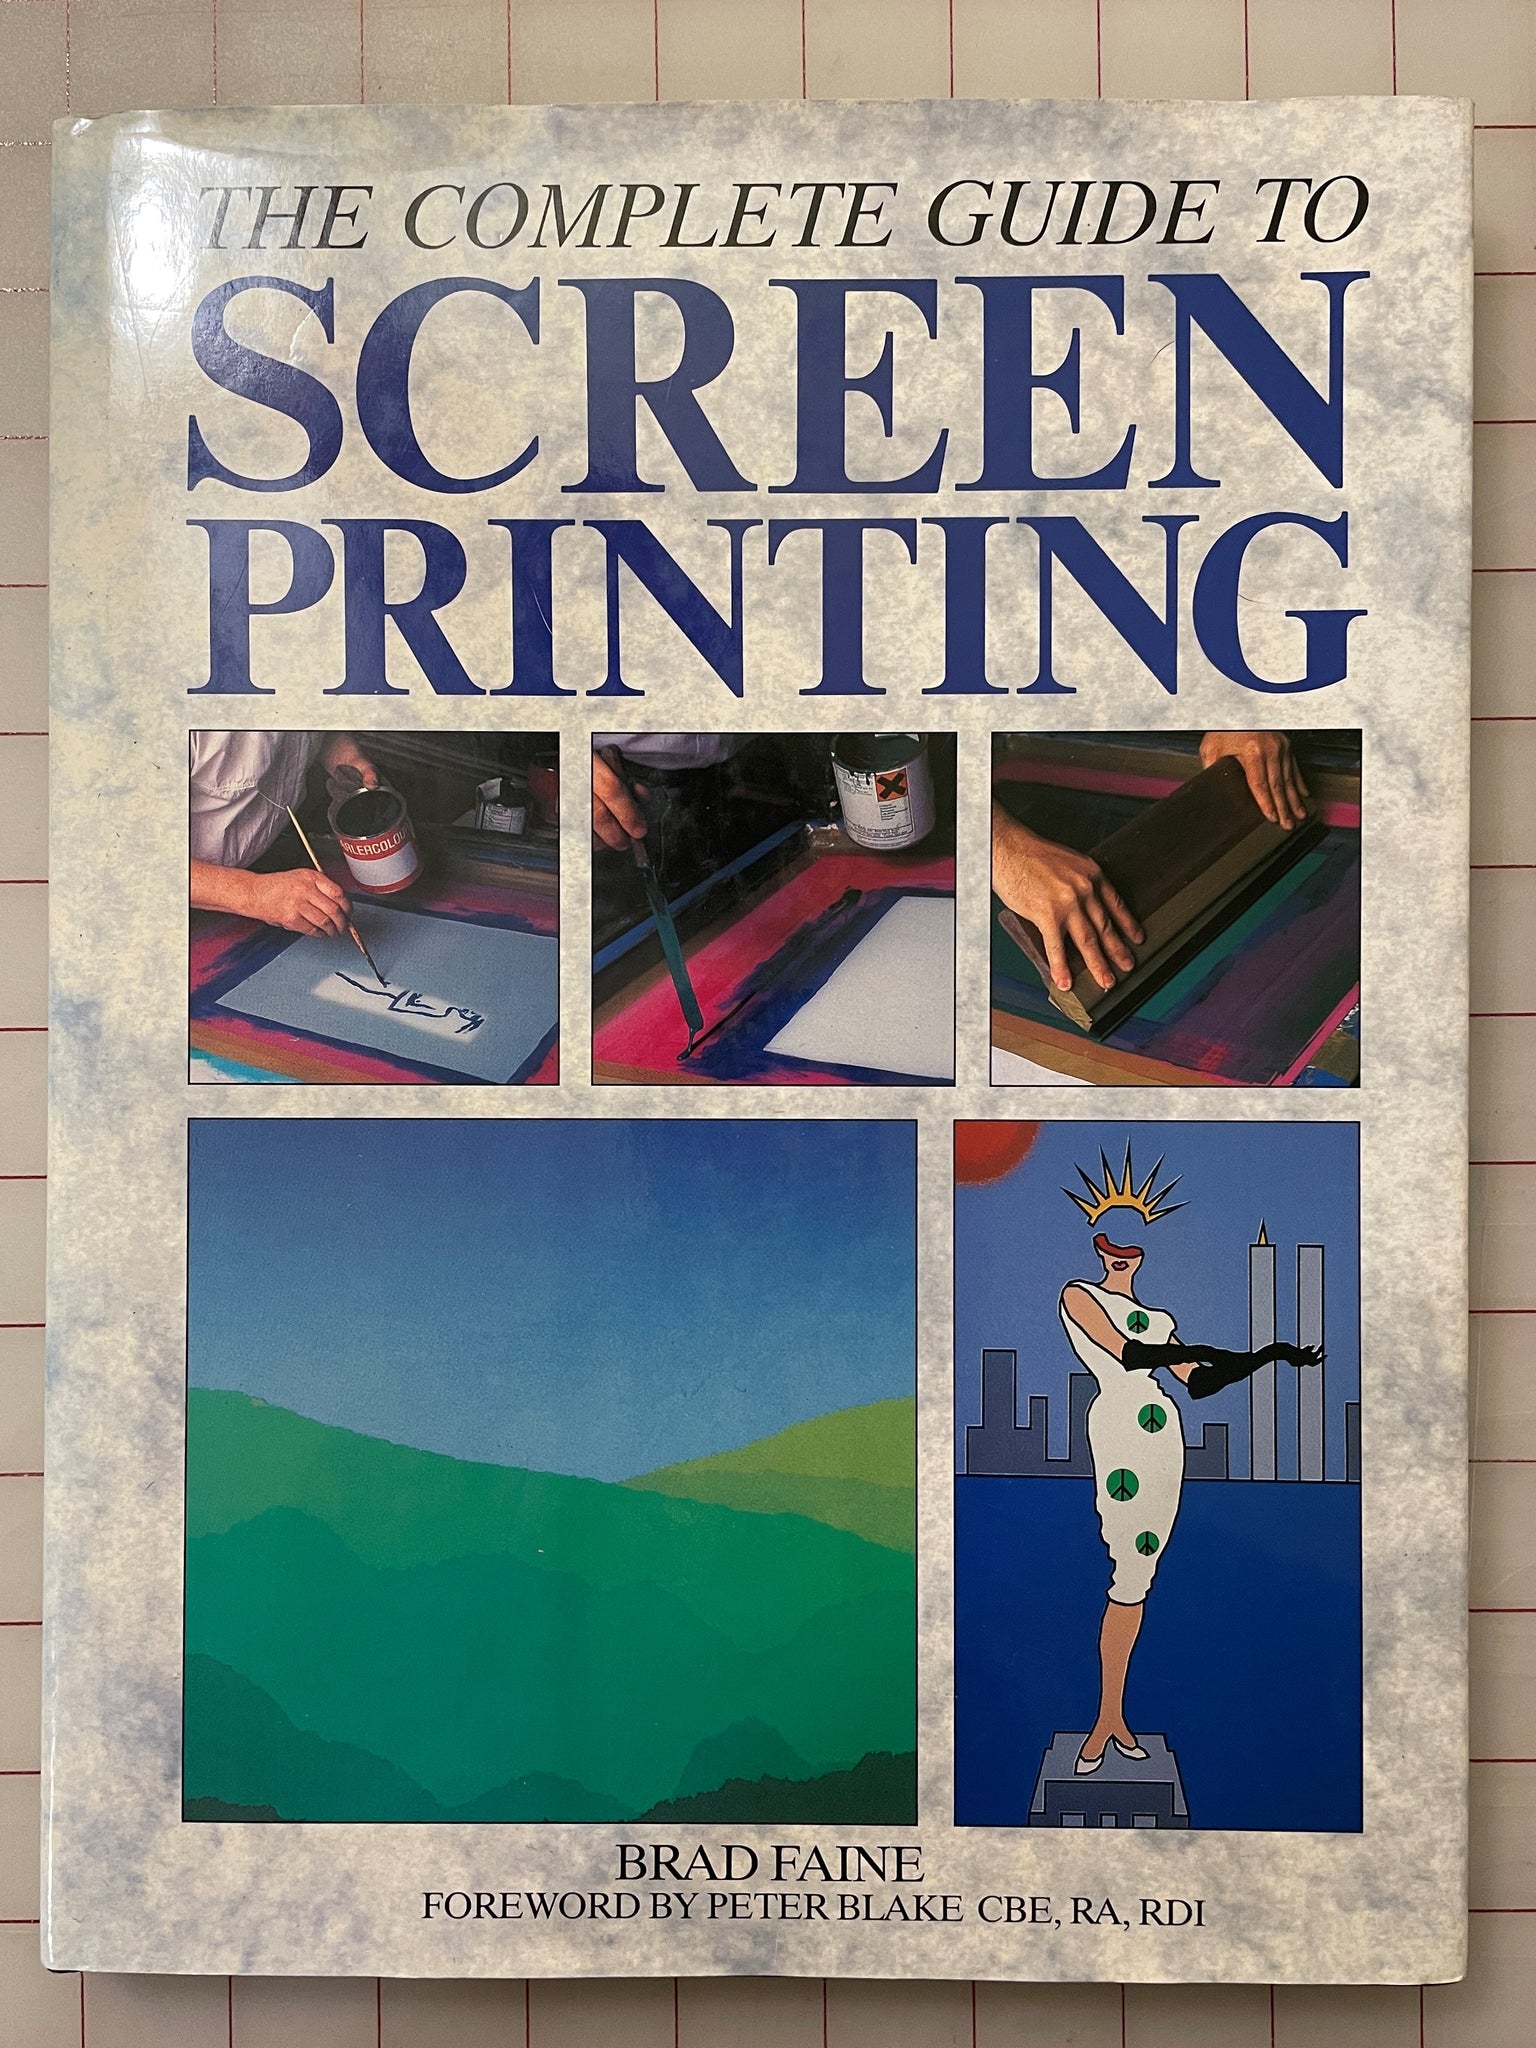 SALE 1993 Book - Complete Guide to Screen Printing